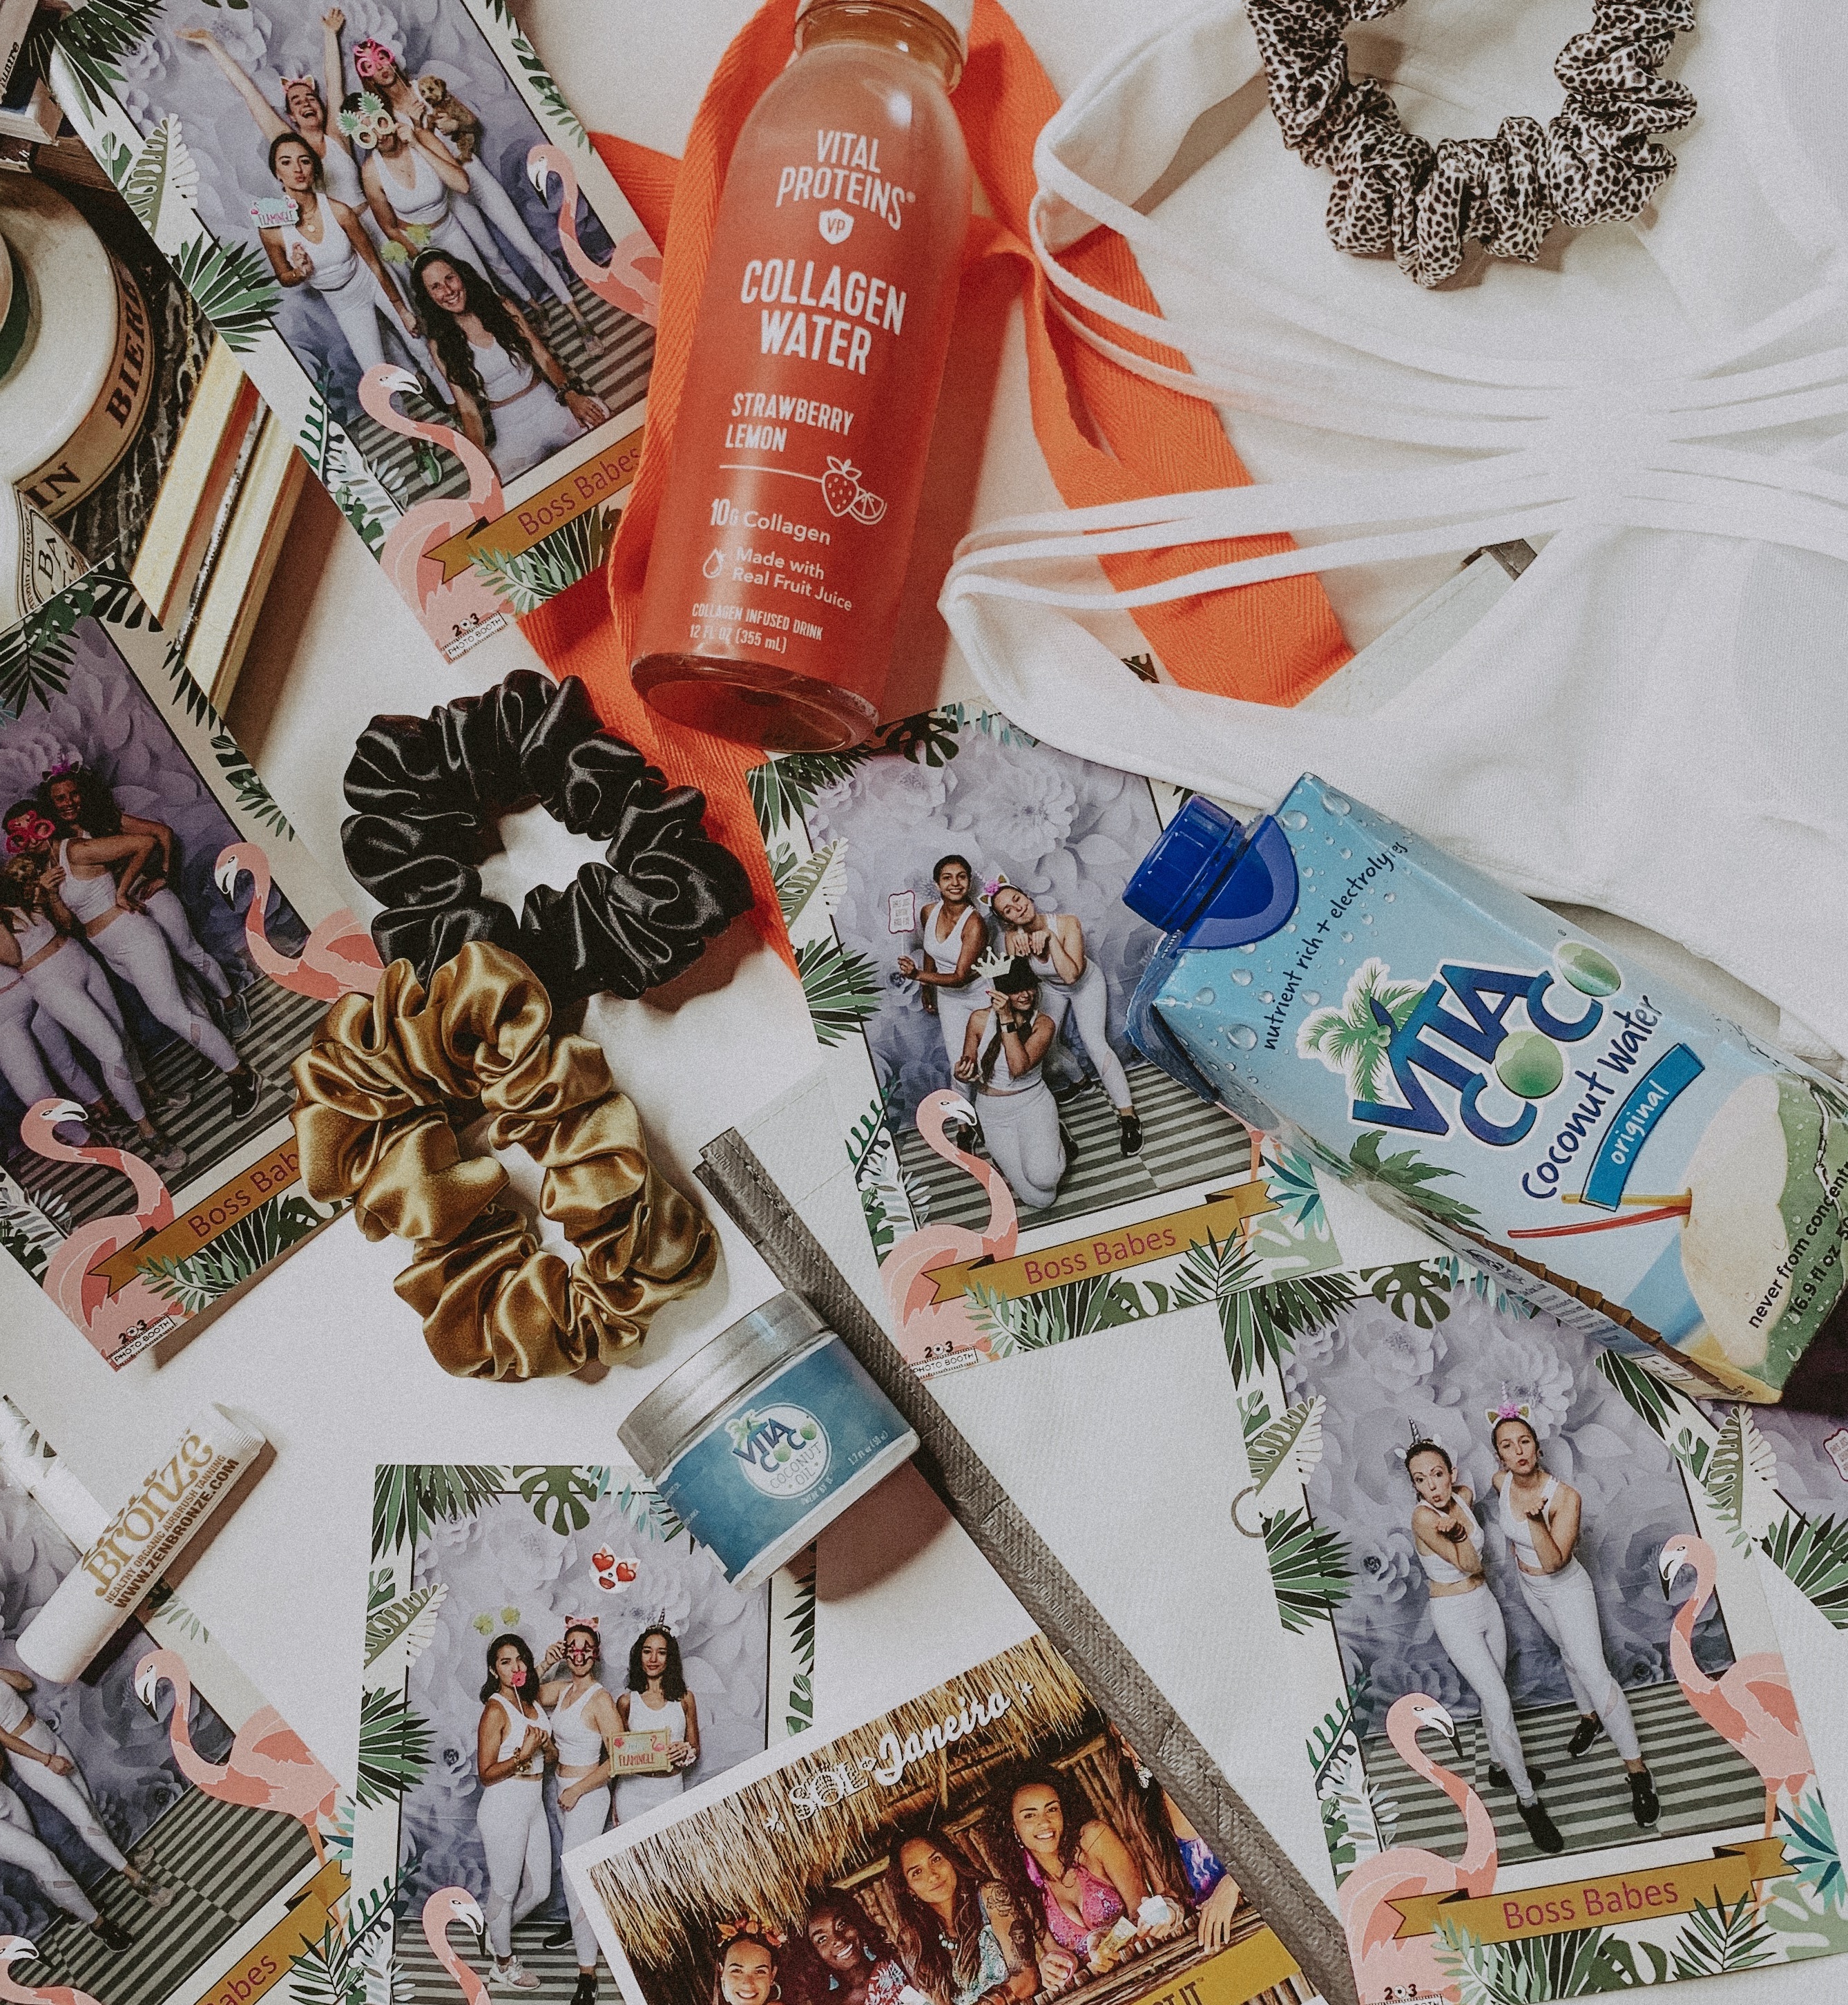 Goodie bag-swag bag-Simply by Simone-Event-Gifts-Sponsors-How to Get Event Sponsors-vital proteins-vita coco-slip silk scrunchie-203 Photobooth-Sweaty Betty #swagbag #flatlay #fitness #goodiebag